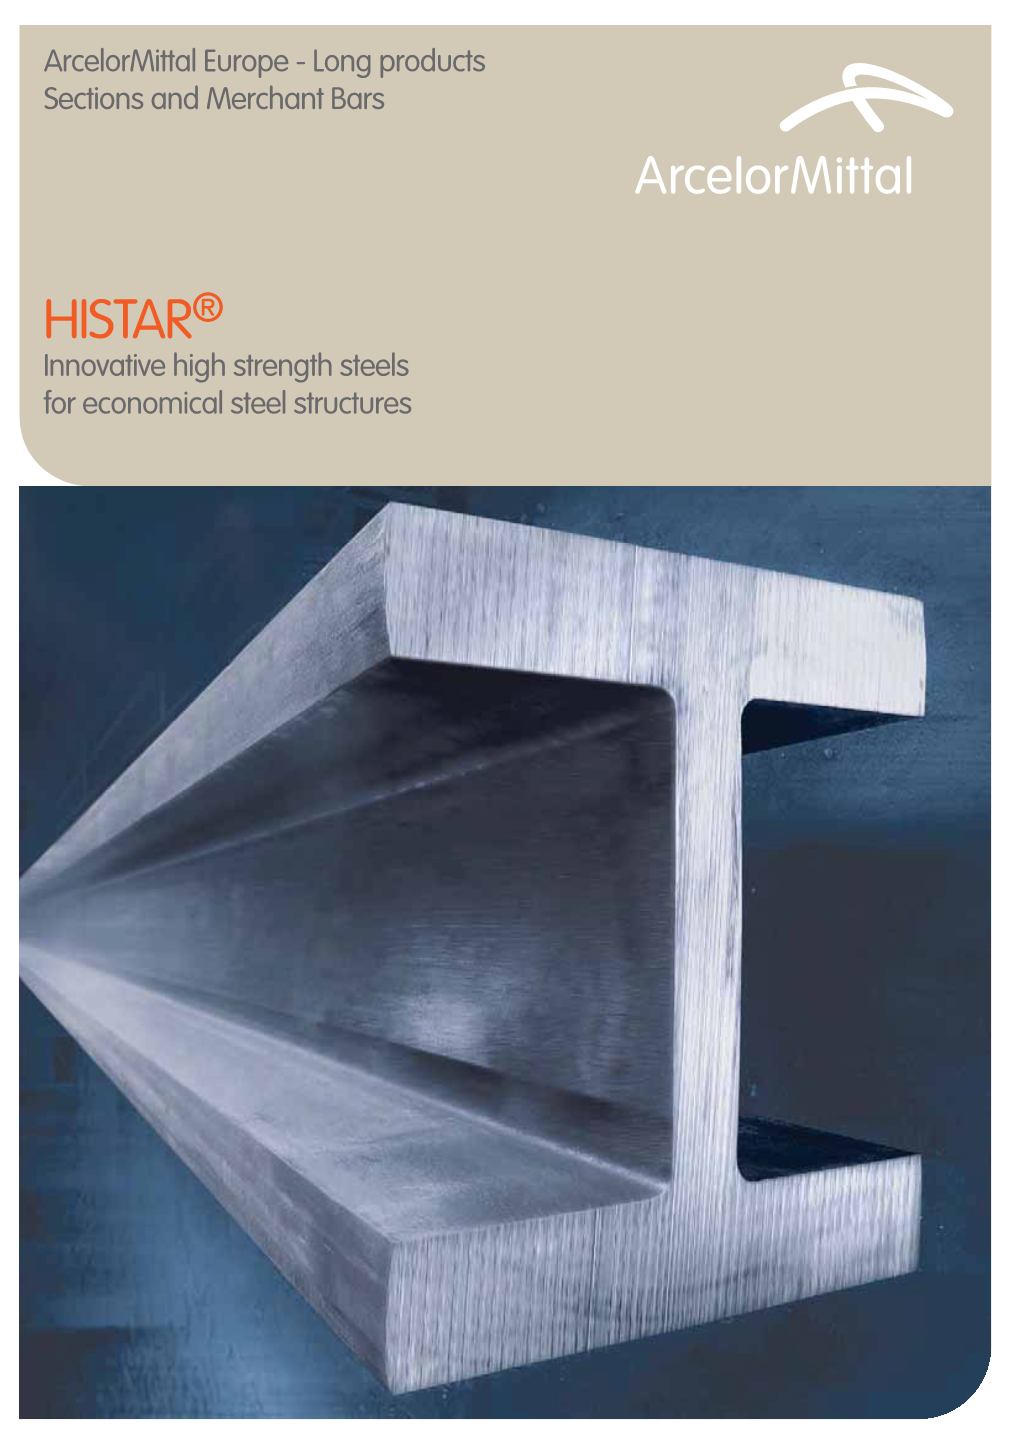 HISTAR® Innovative High Strength Steels for Economical Steel Structures Shanghai World Finance Center, P.R